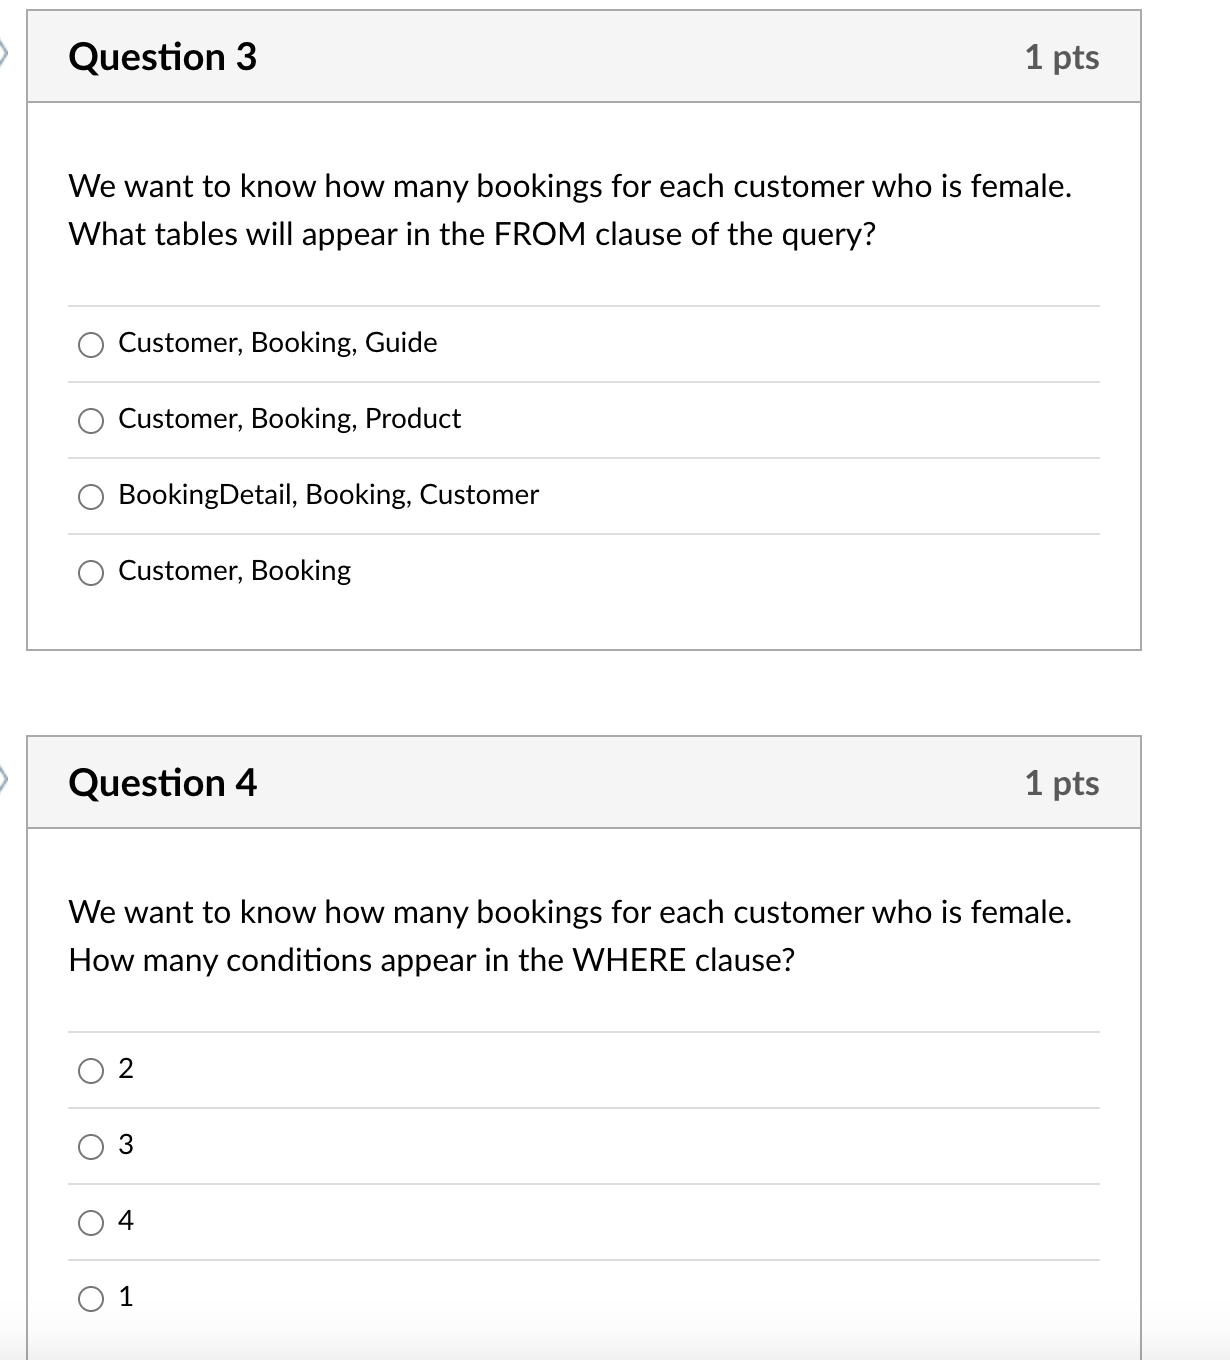 Question 3 We want to know how many bookings for each customer who is female. What tables will appear in the